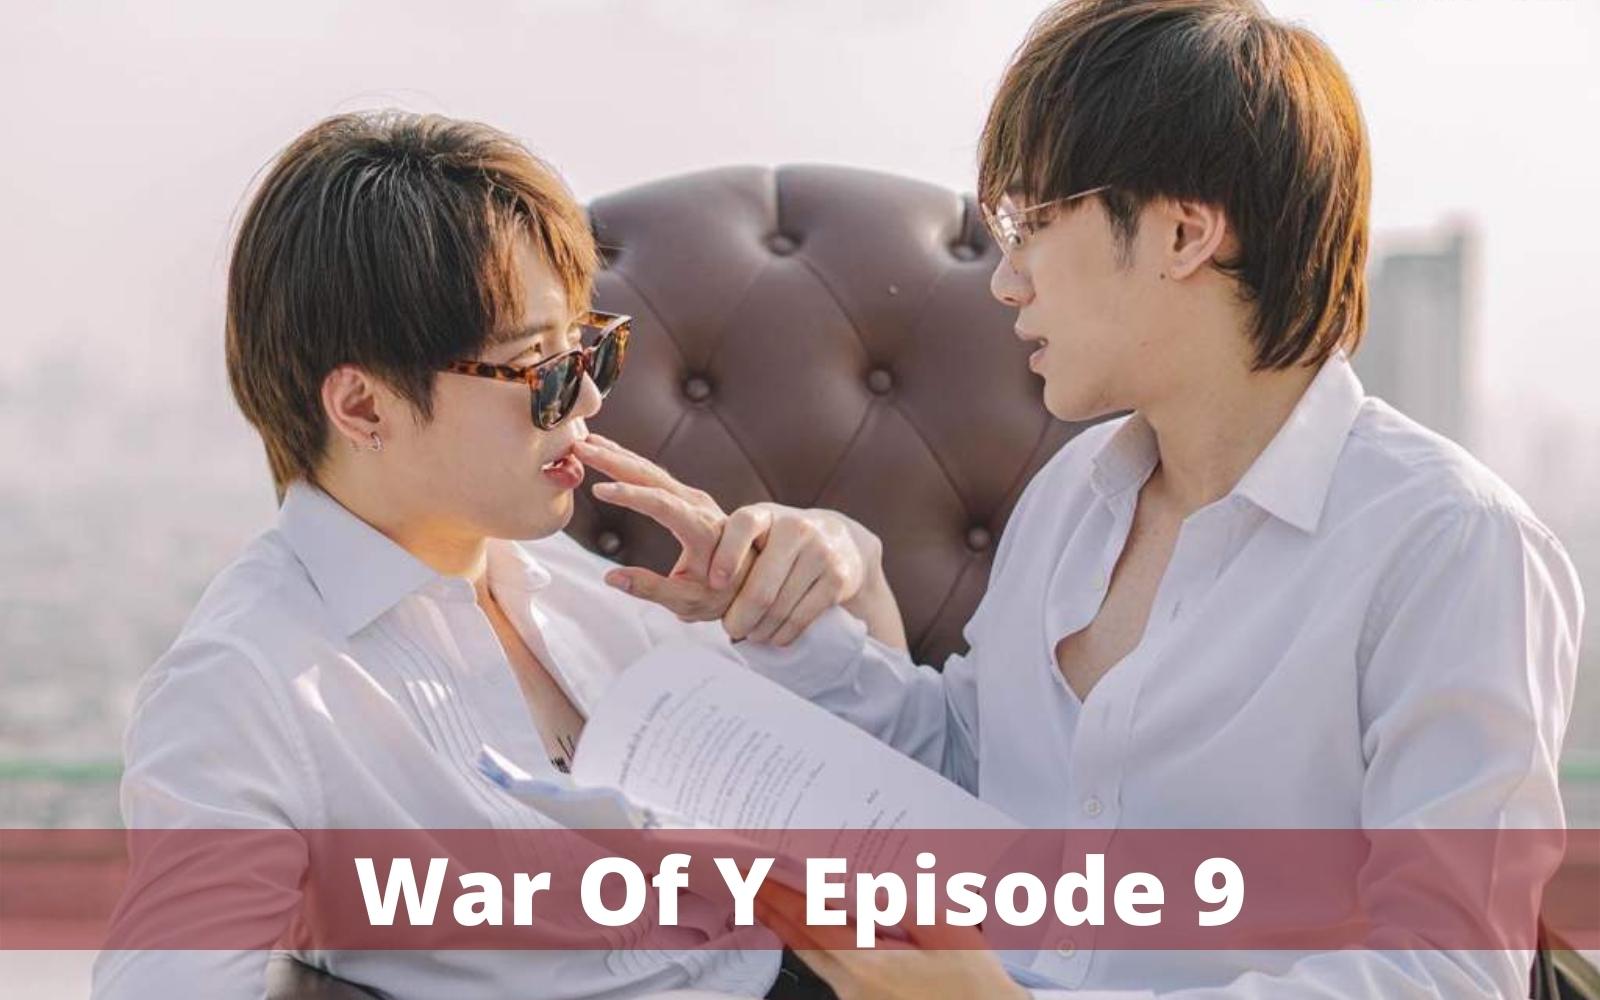 War of Y Episode 9 Coming Out? Release Date & Time, Trailer, Cast, Recap and Spoiler Everything You Need to Know